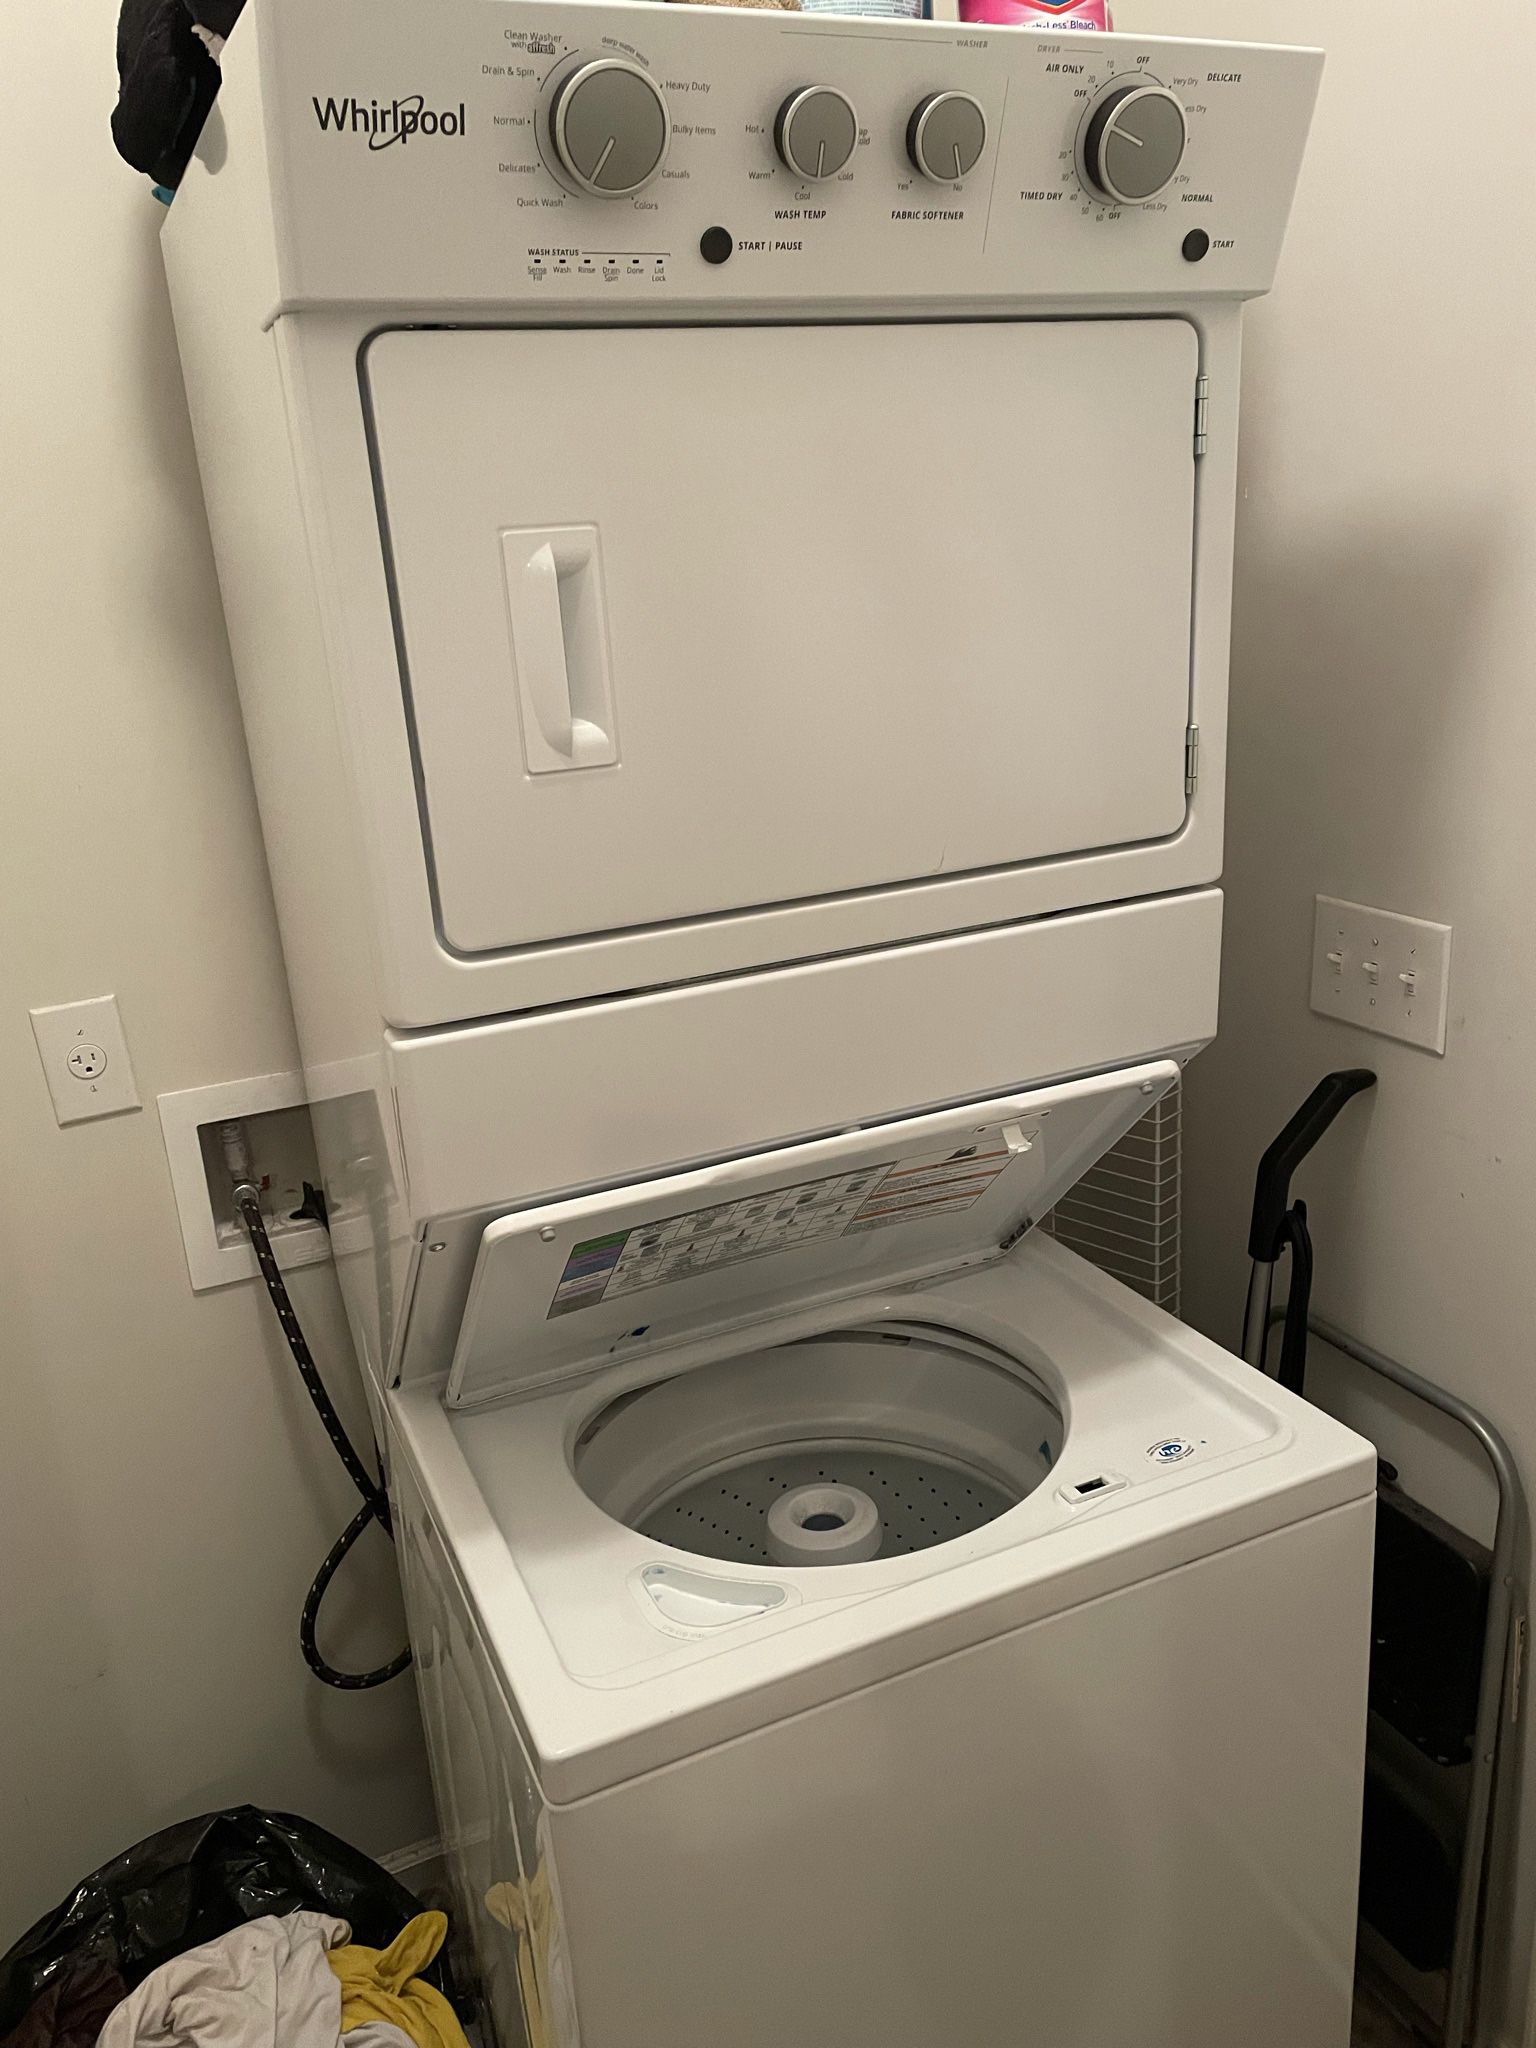 Stackable Whirlpool Washer And Dryer 